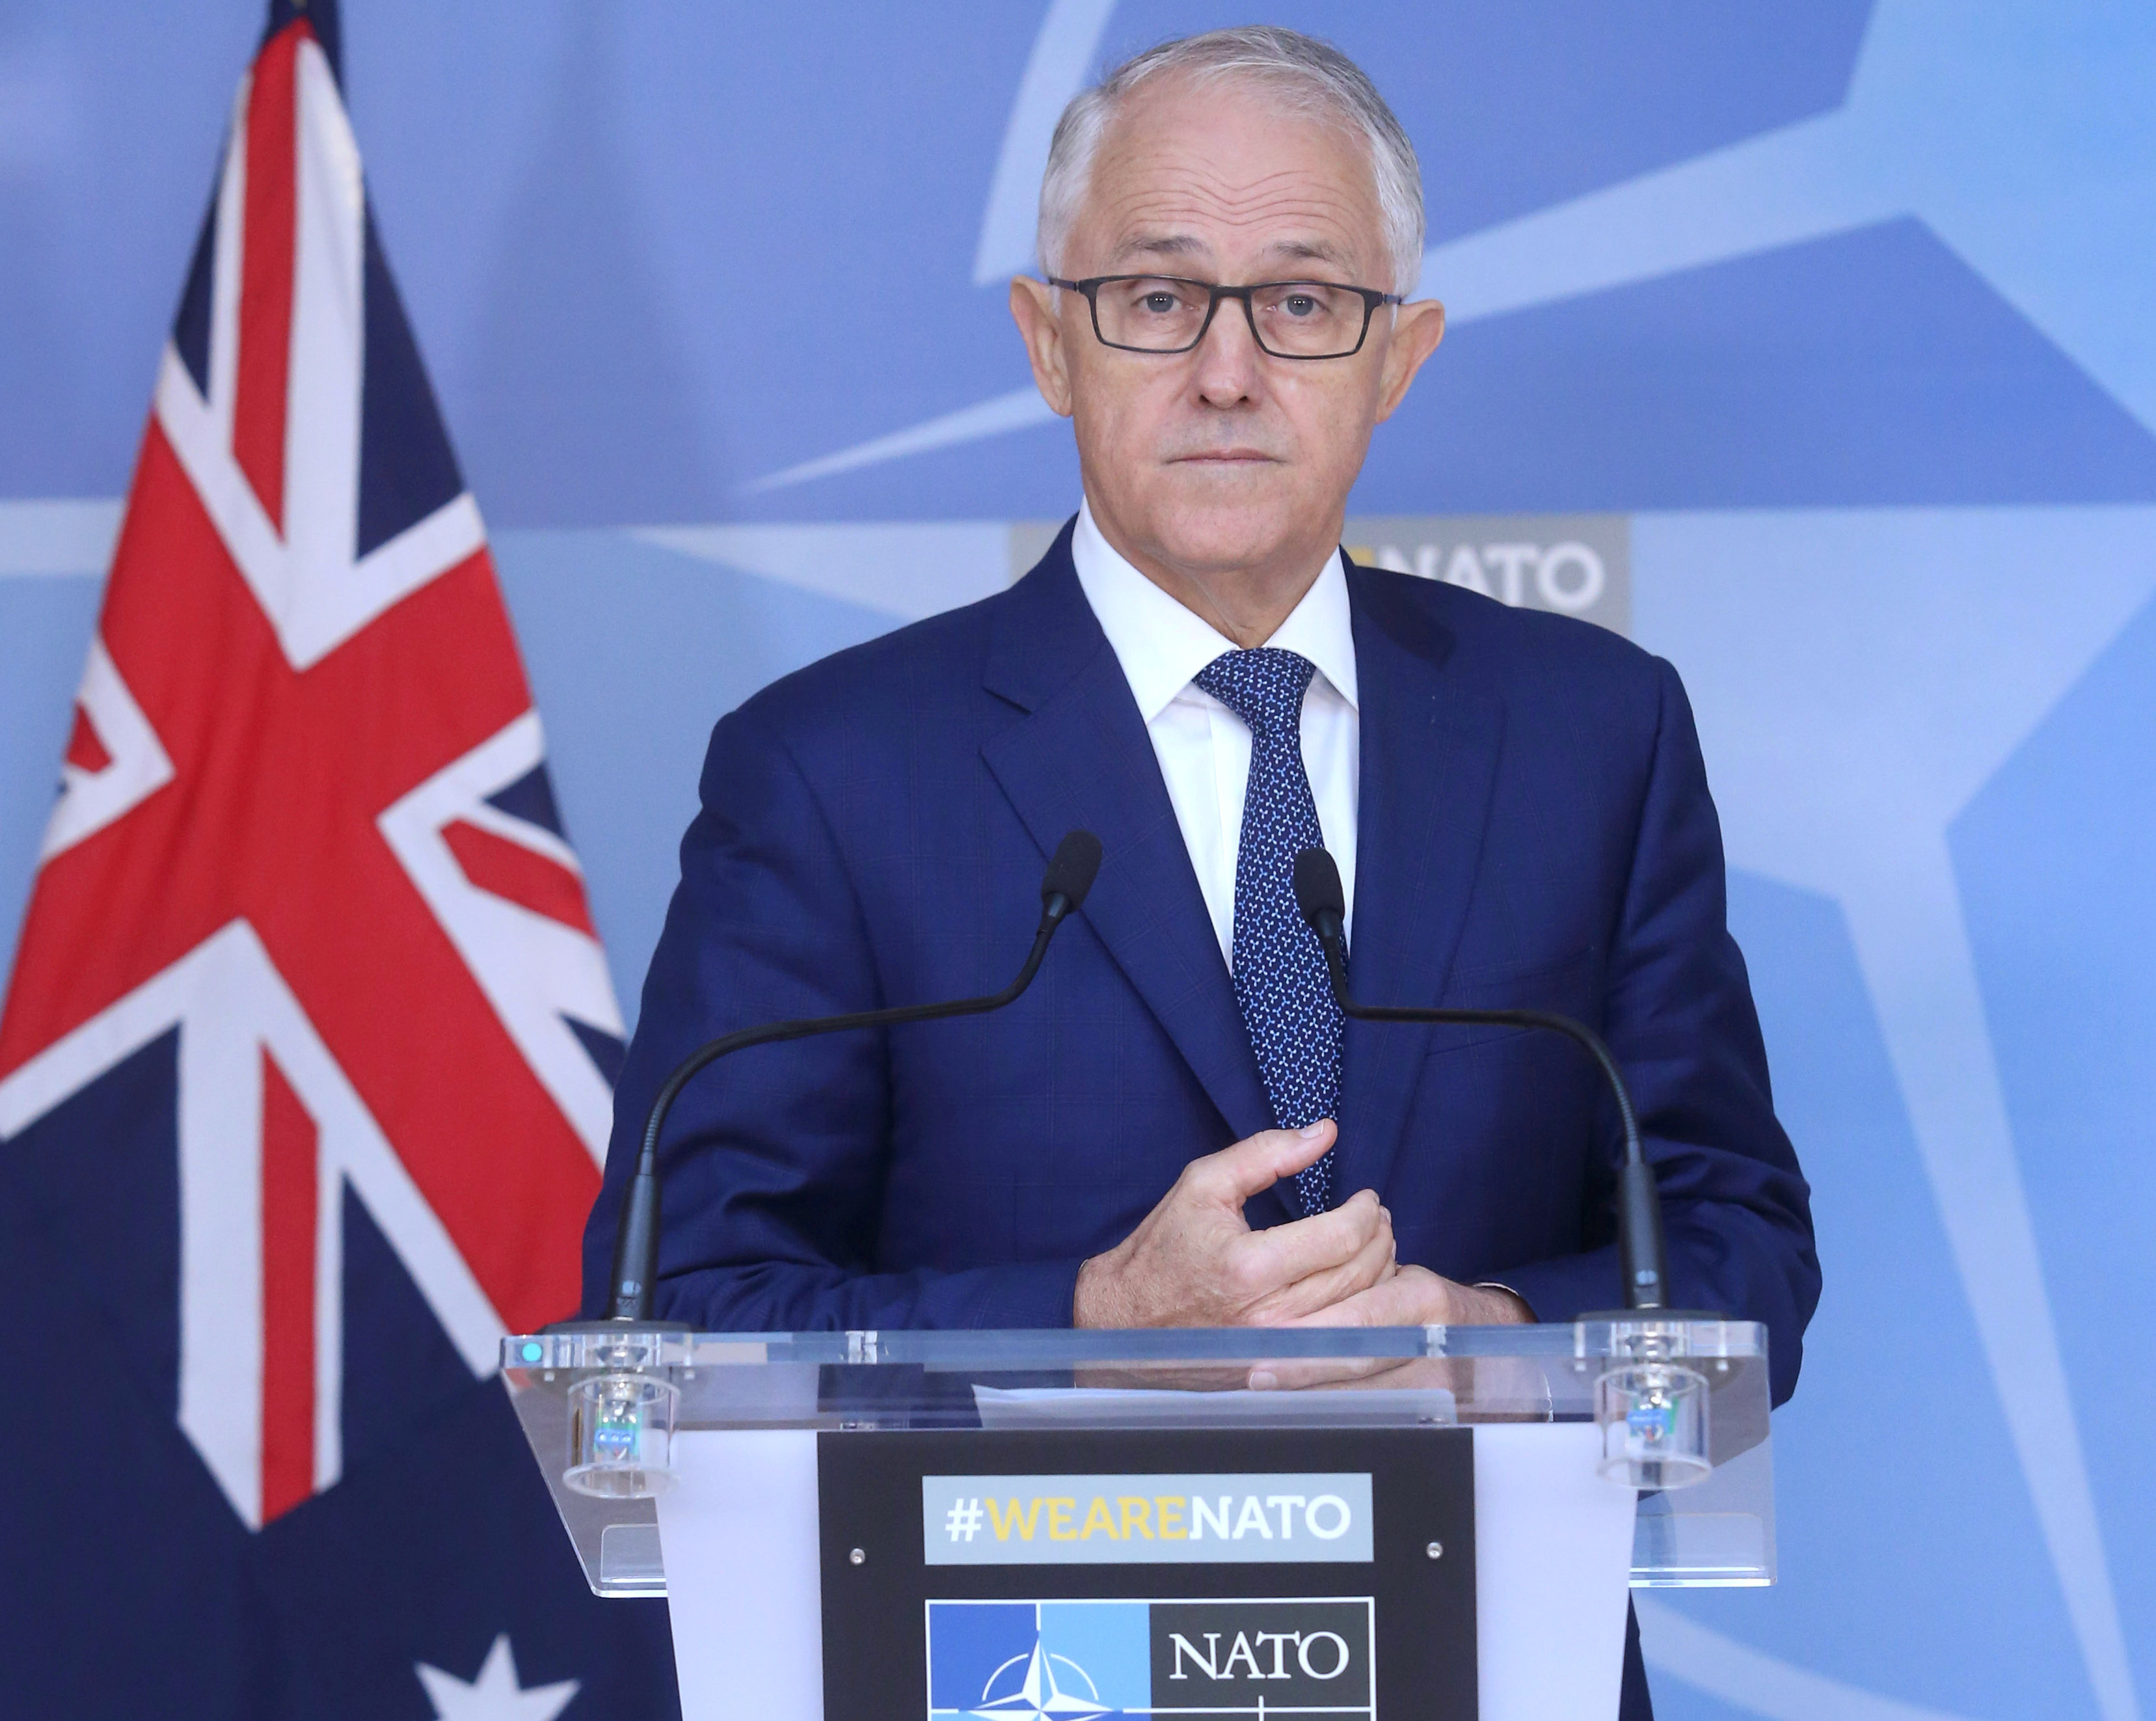 Australia PM's popularity rises, but party still lags: Poll